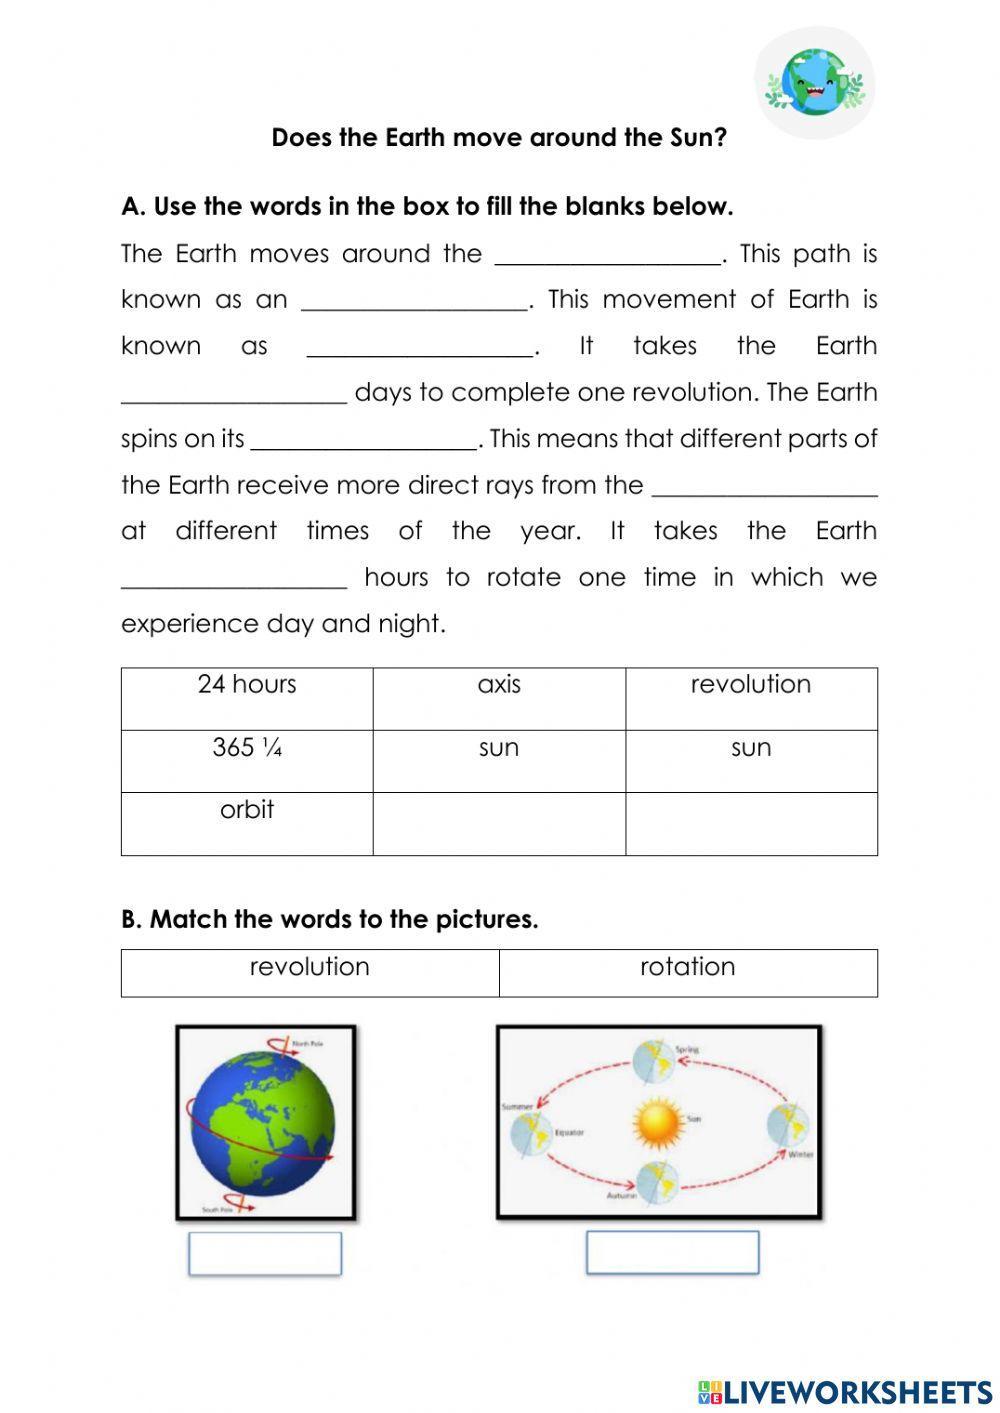 Does the Earth move around the sun?